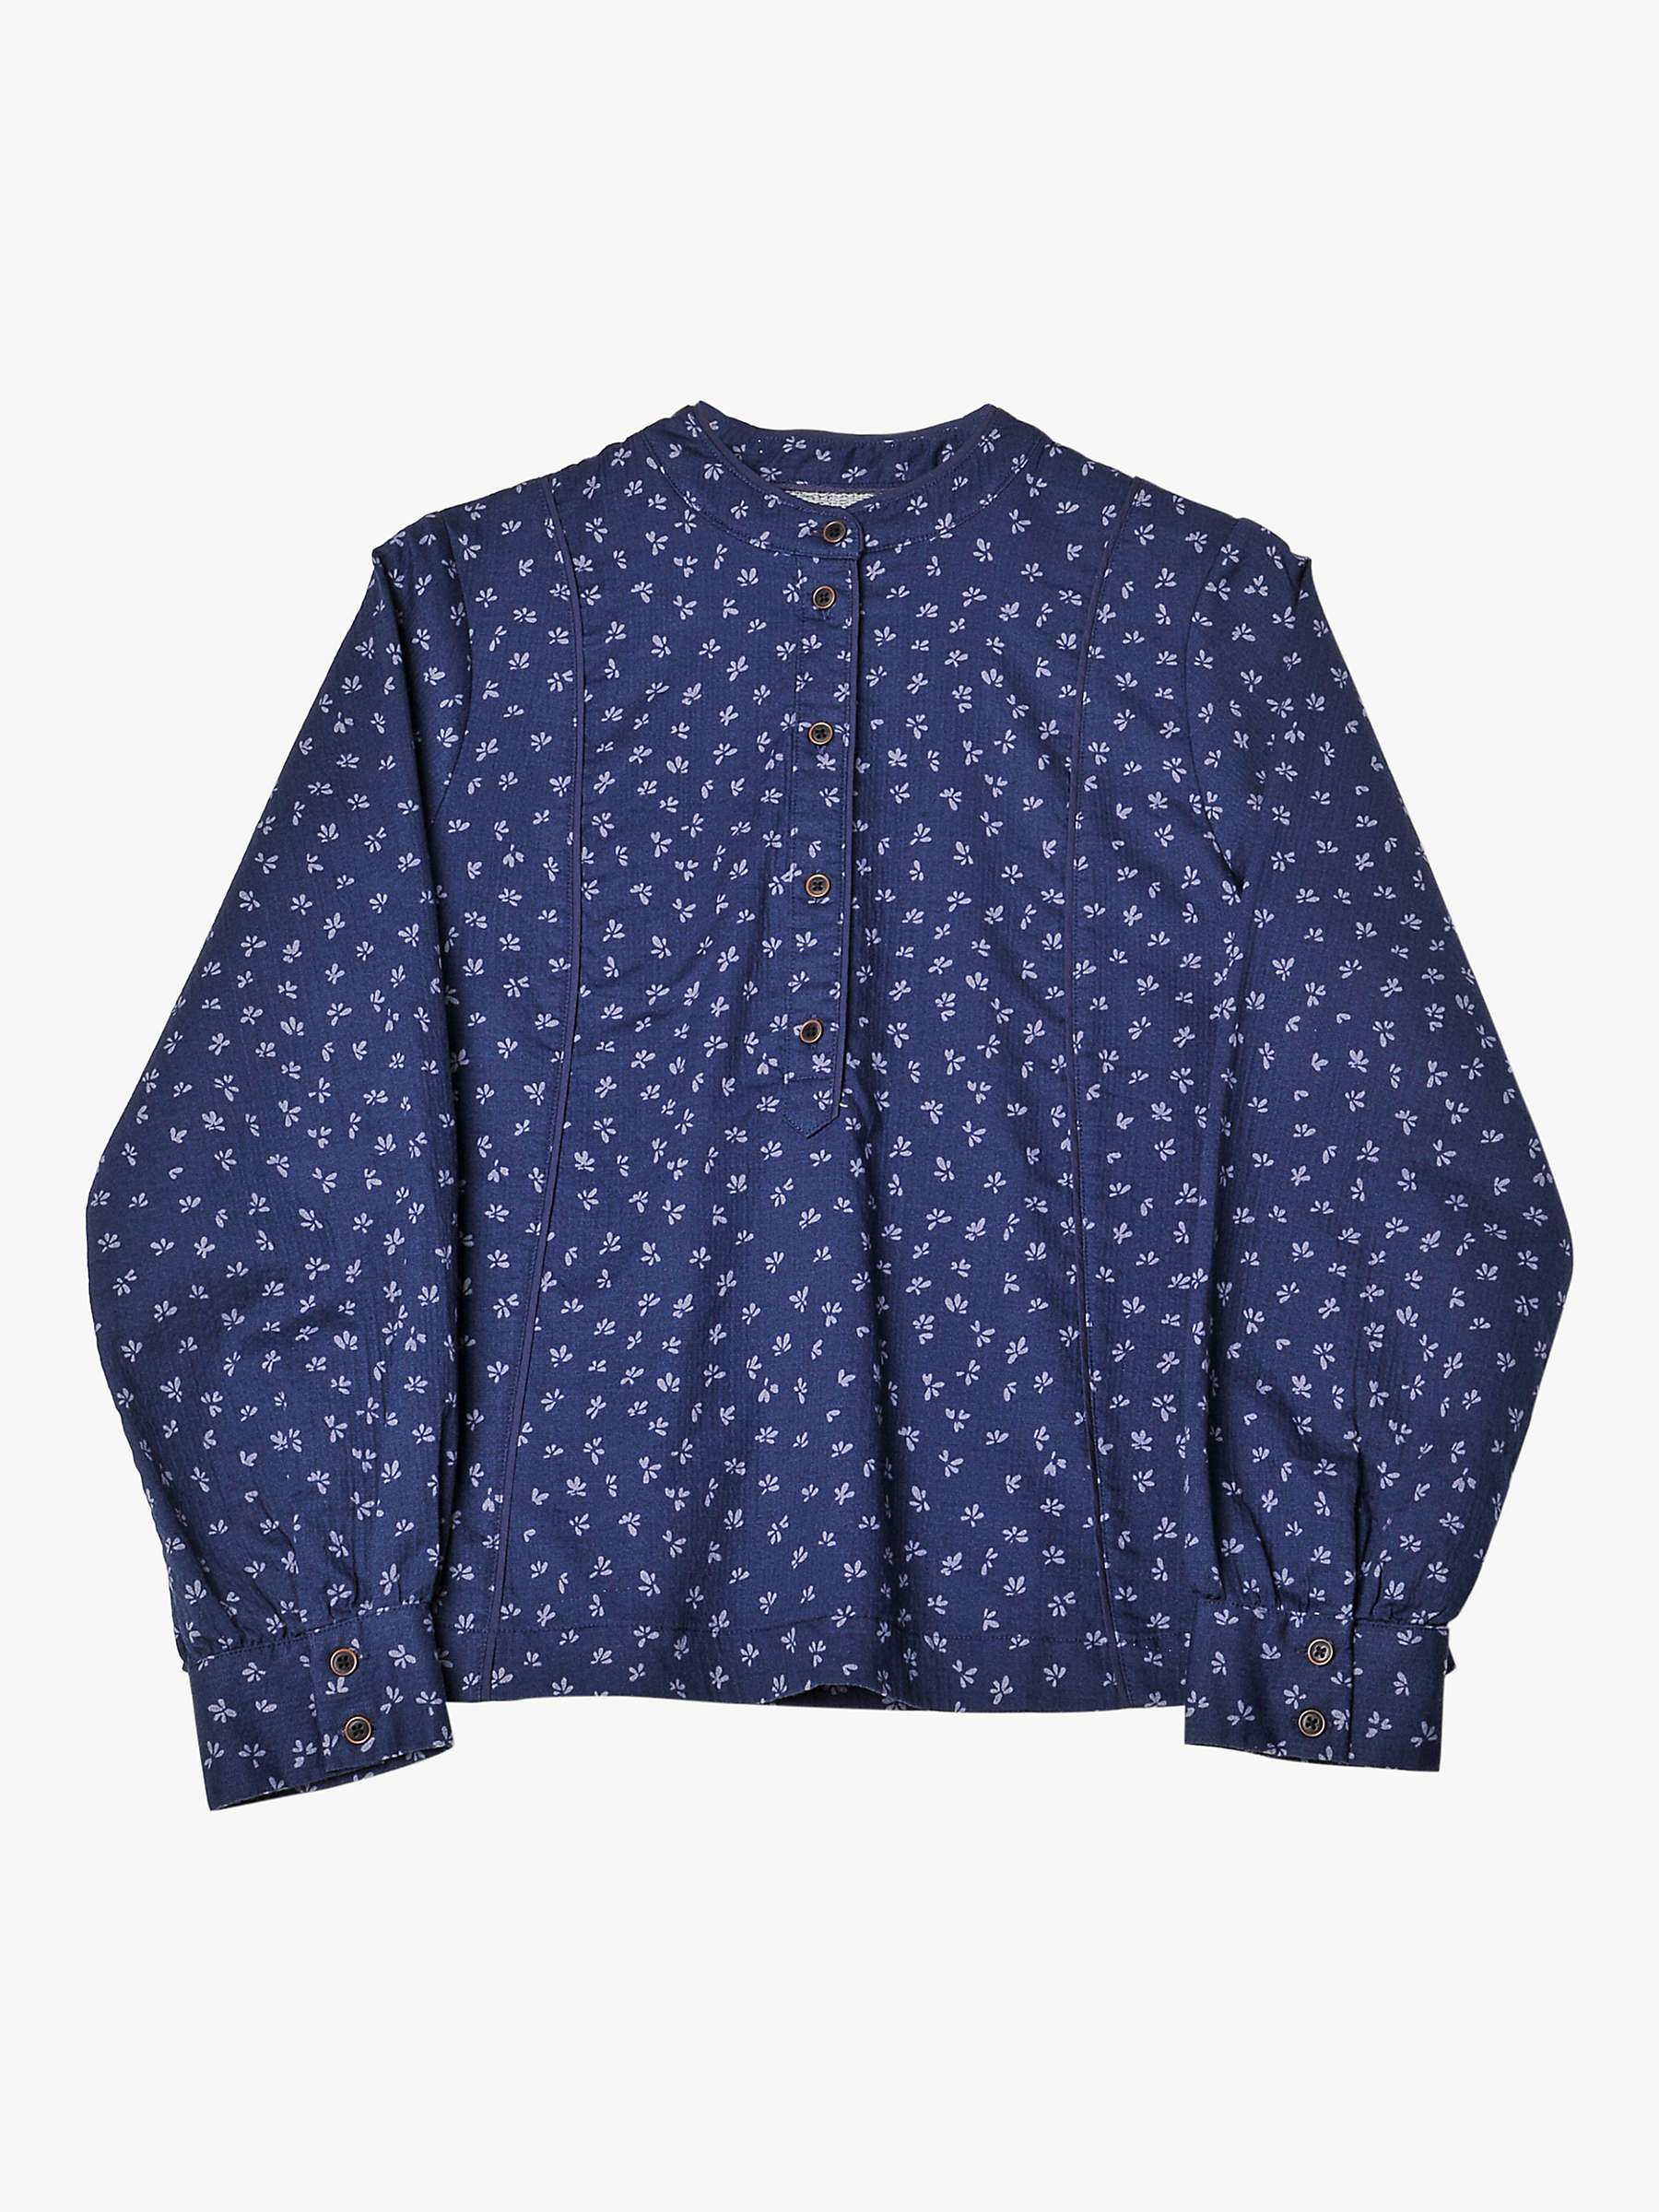 Buy Burgs Abbey Floral Print Shirt, Midnight Navy Online at johnlewis.com